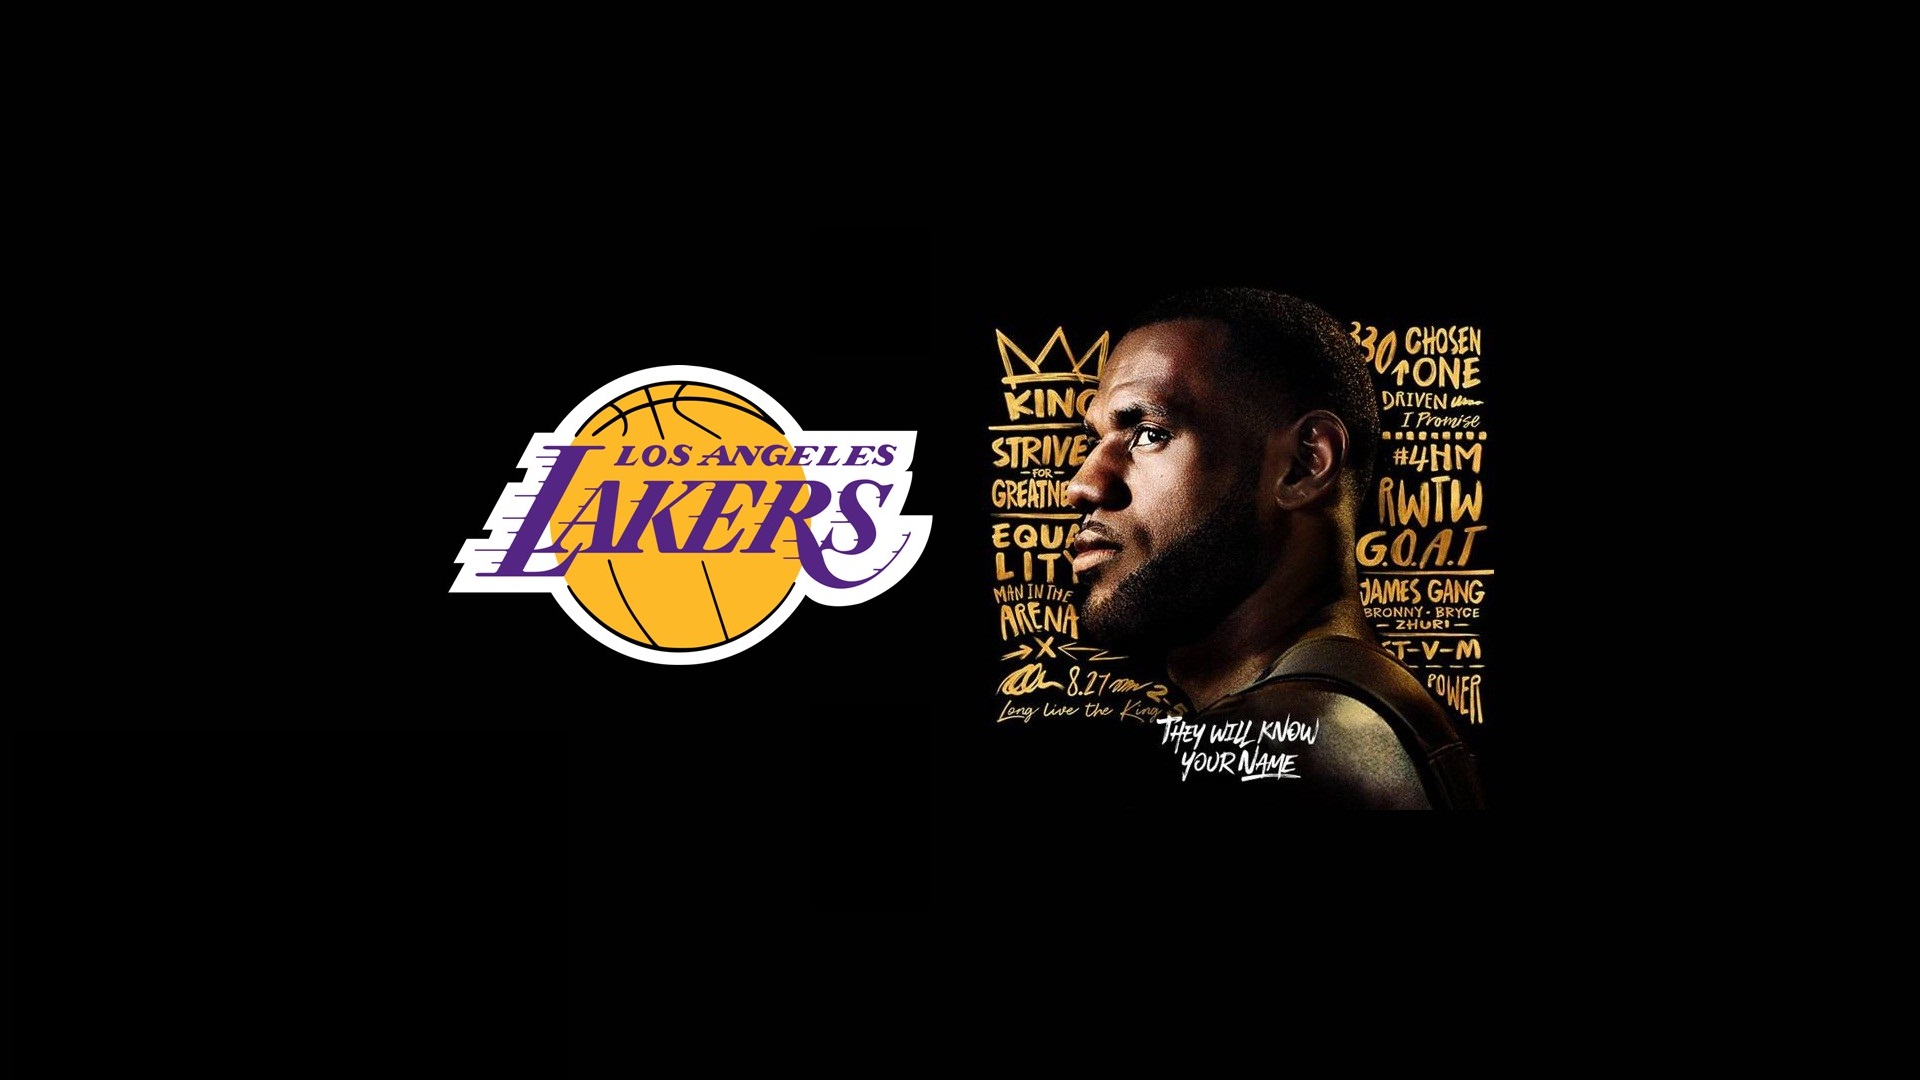 HD LeBron James Lakers Wallpapers with image dimensions 1920x1080 pixel. You can make this wallpaper for your Desktop Computer Backgrounds, Windows or Mac Screensavers, iPhone Lock screen, Tablet or Android and another Mobile Phone device